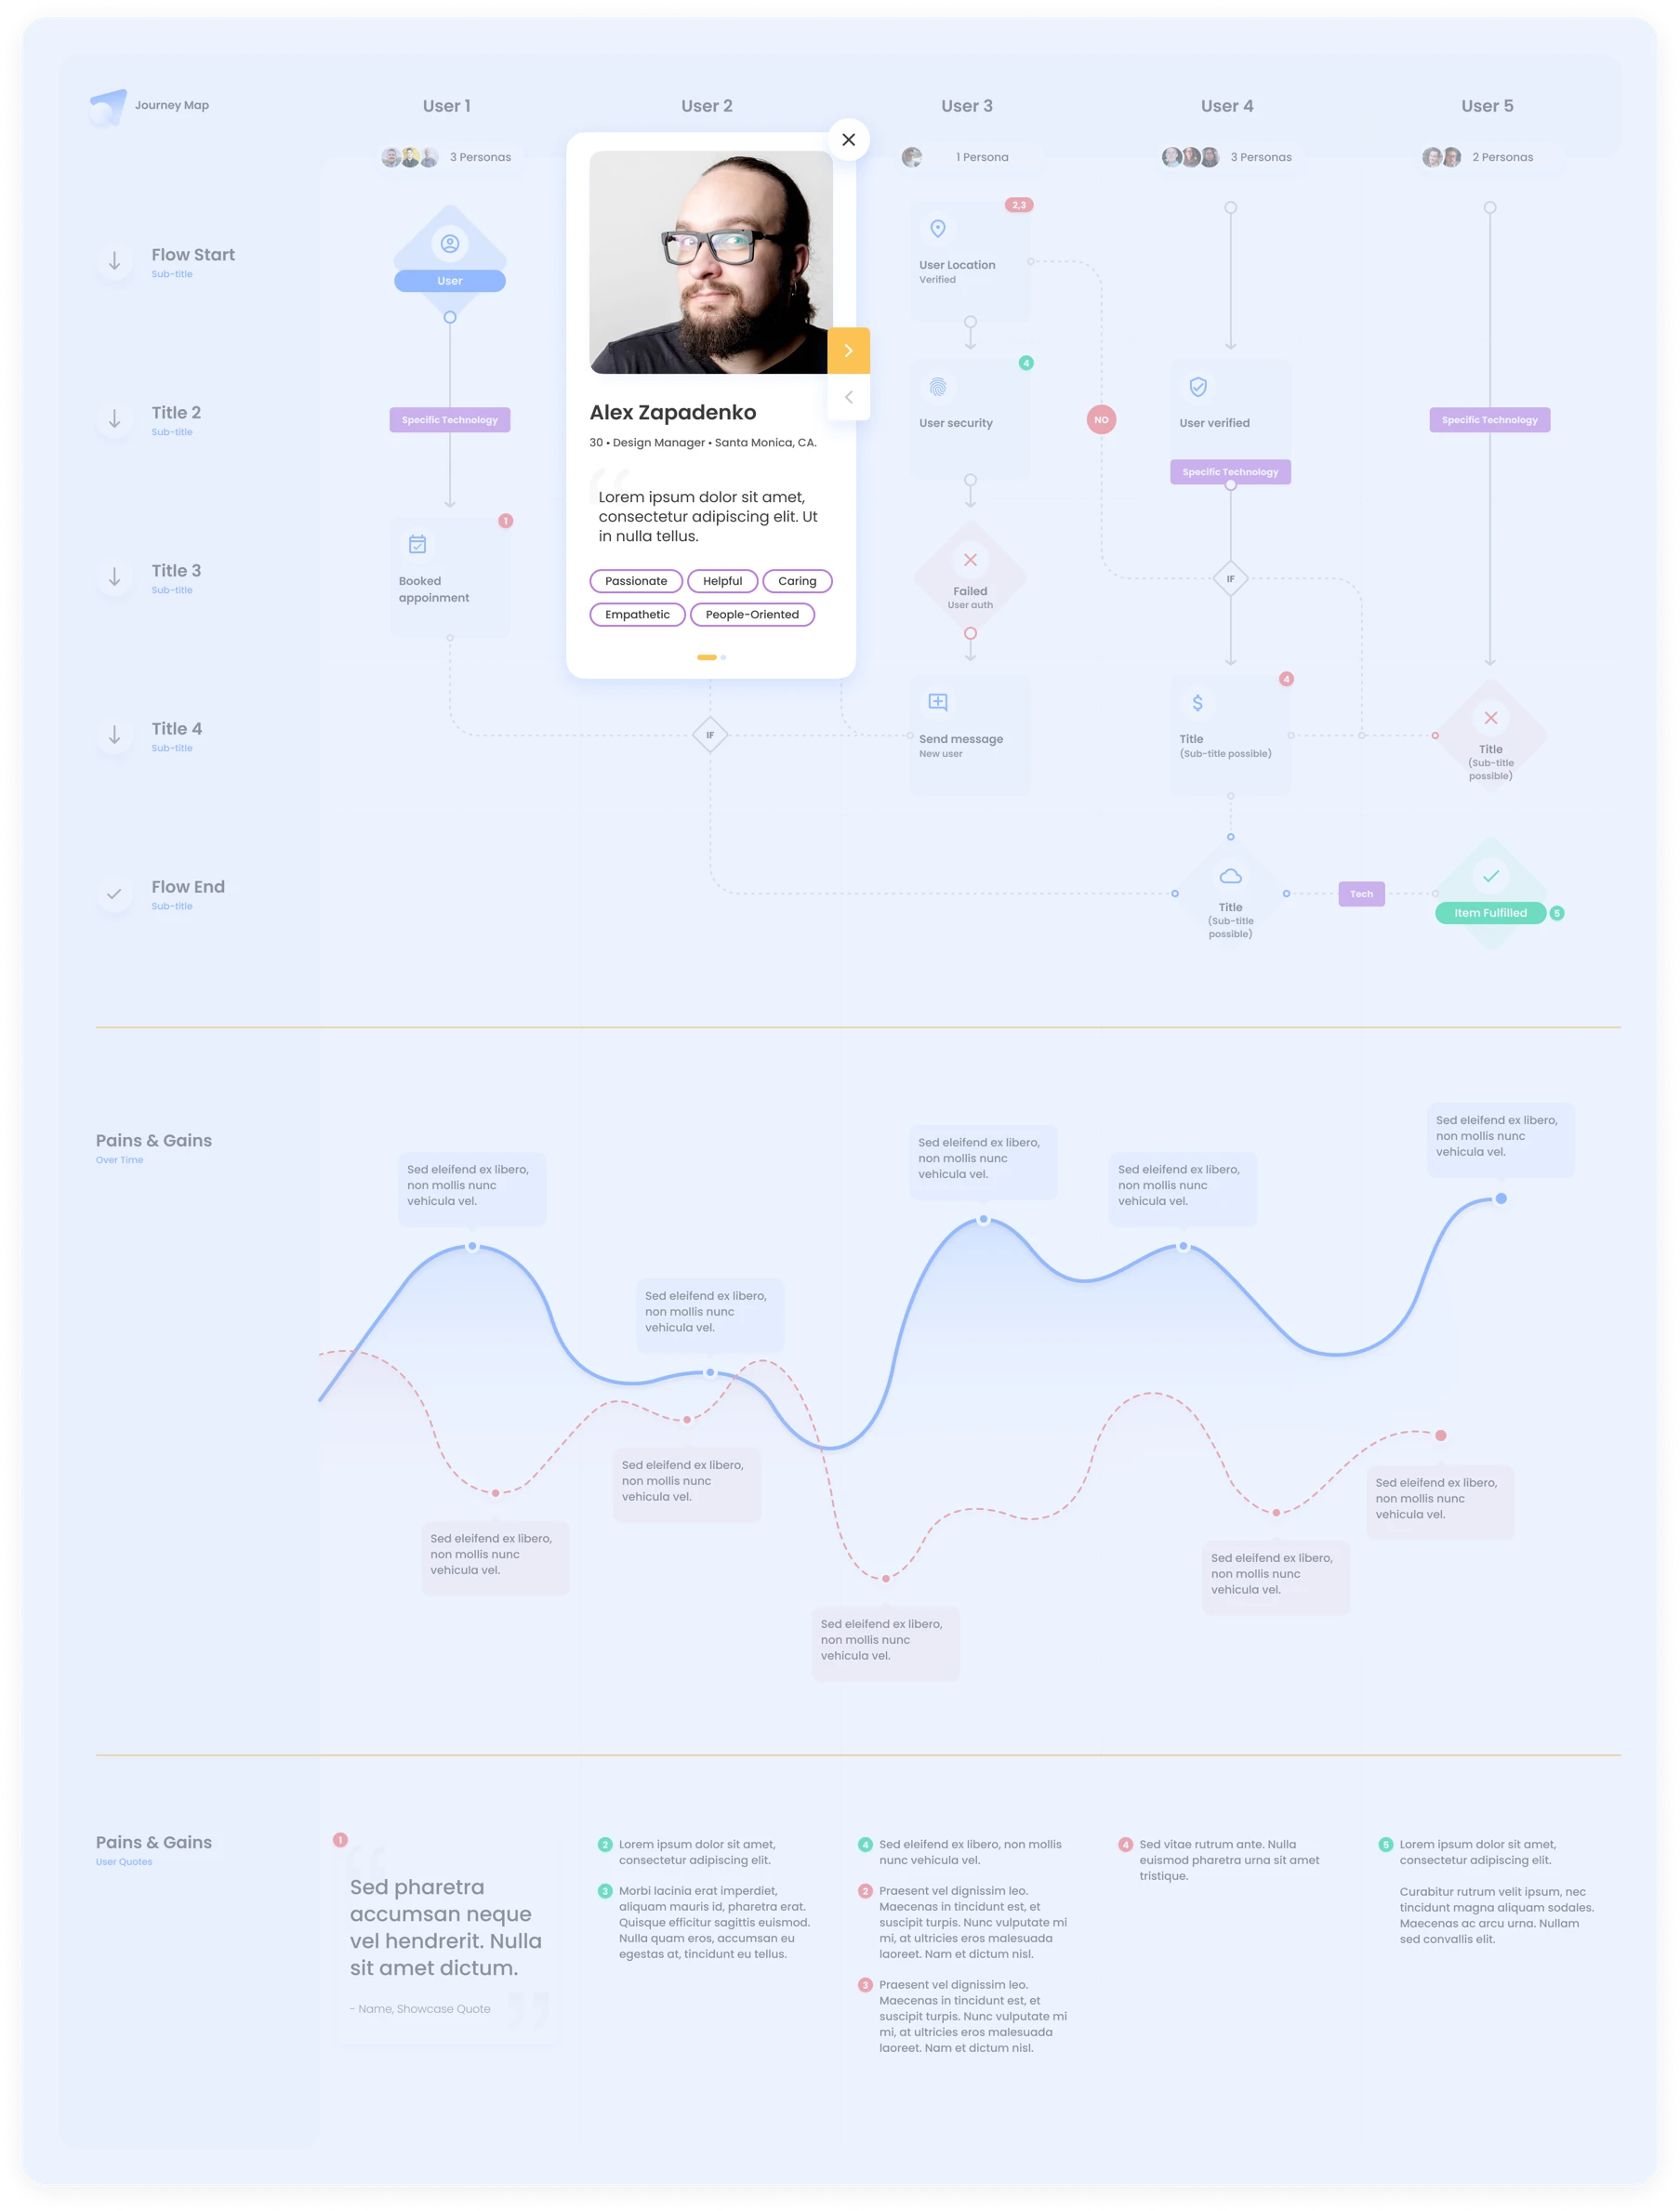 Interactive Journey Map for Figma - Meet the Interactive Journey Map, a new take on journey mapping using Figma's prototyping tools. Expandable mini user personas and clickable user-flow flow elements enable you to go deeper into the details. Duplicate the file and start using it now for free.